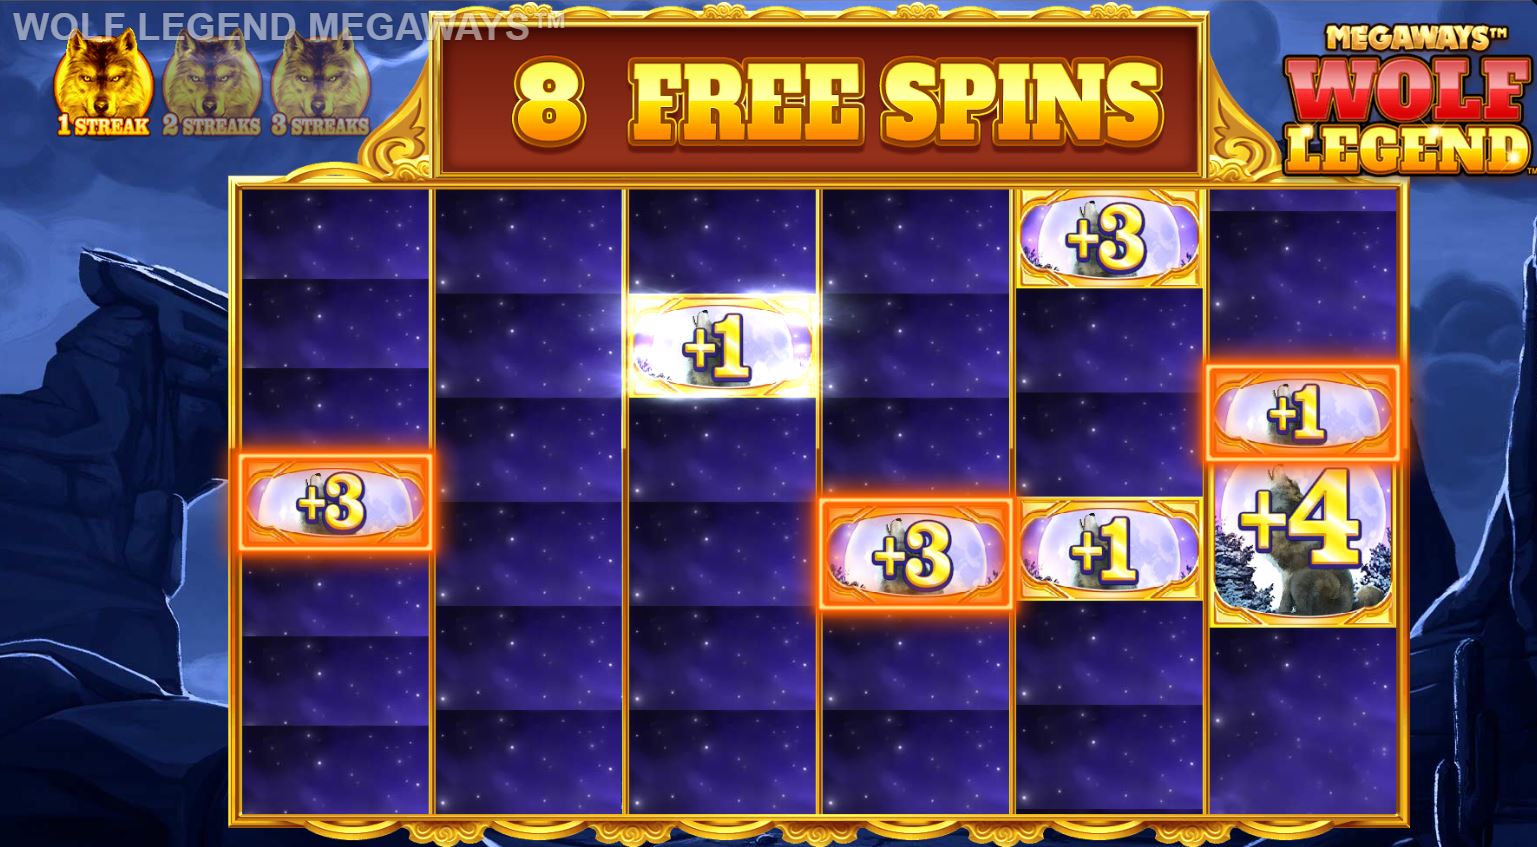 Free Spins Collection in Wolf Legend Megaways